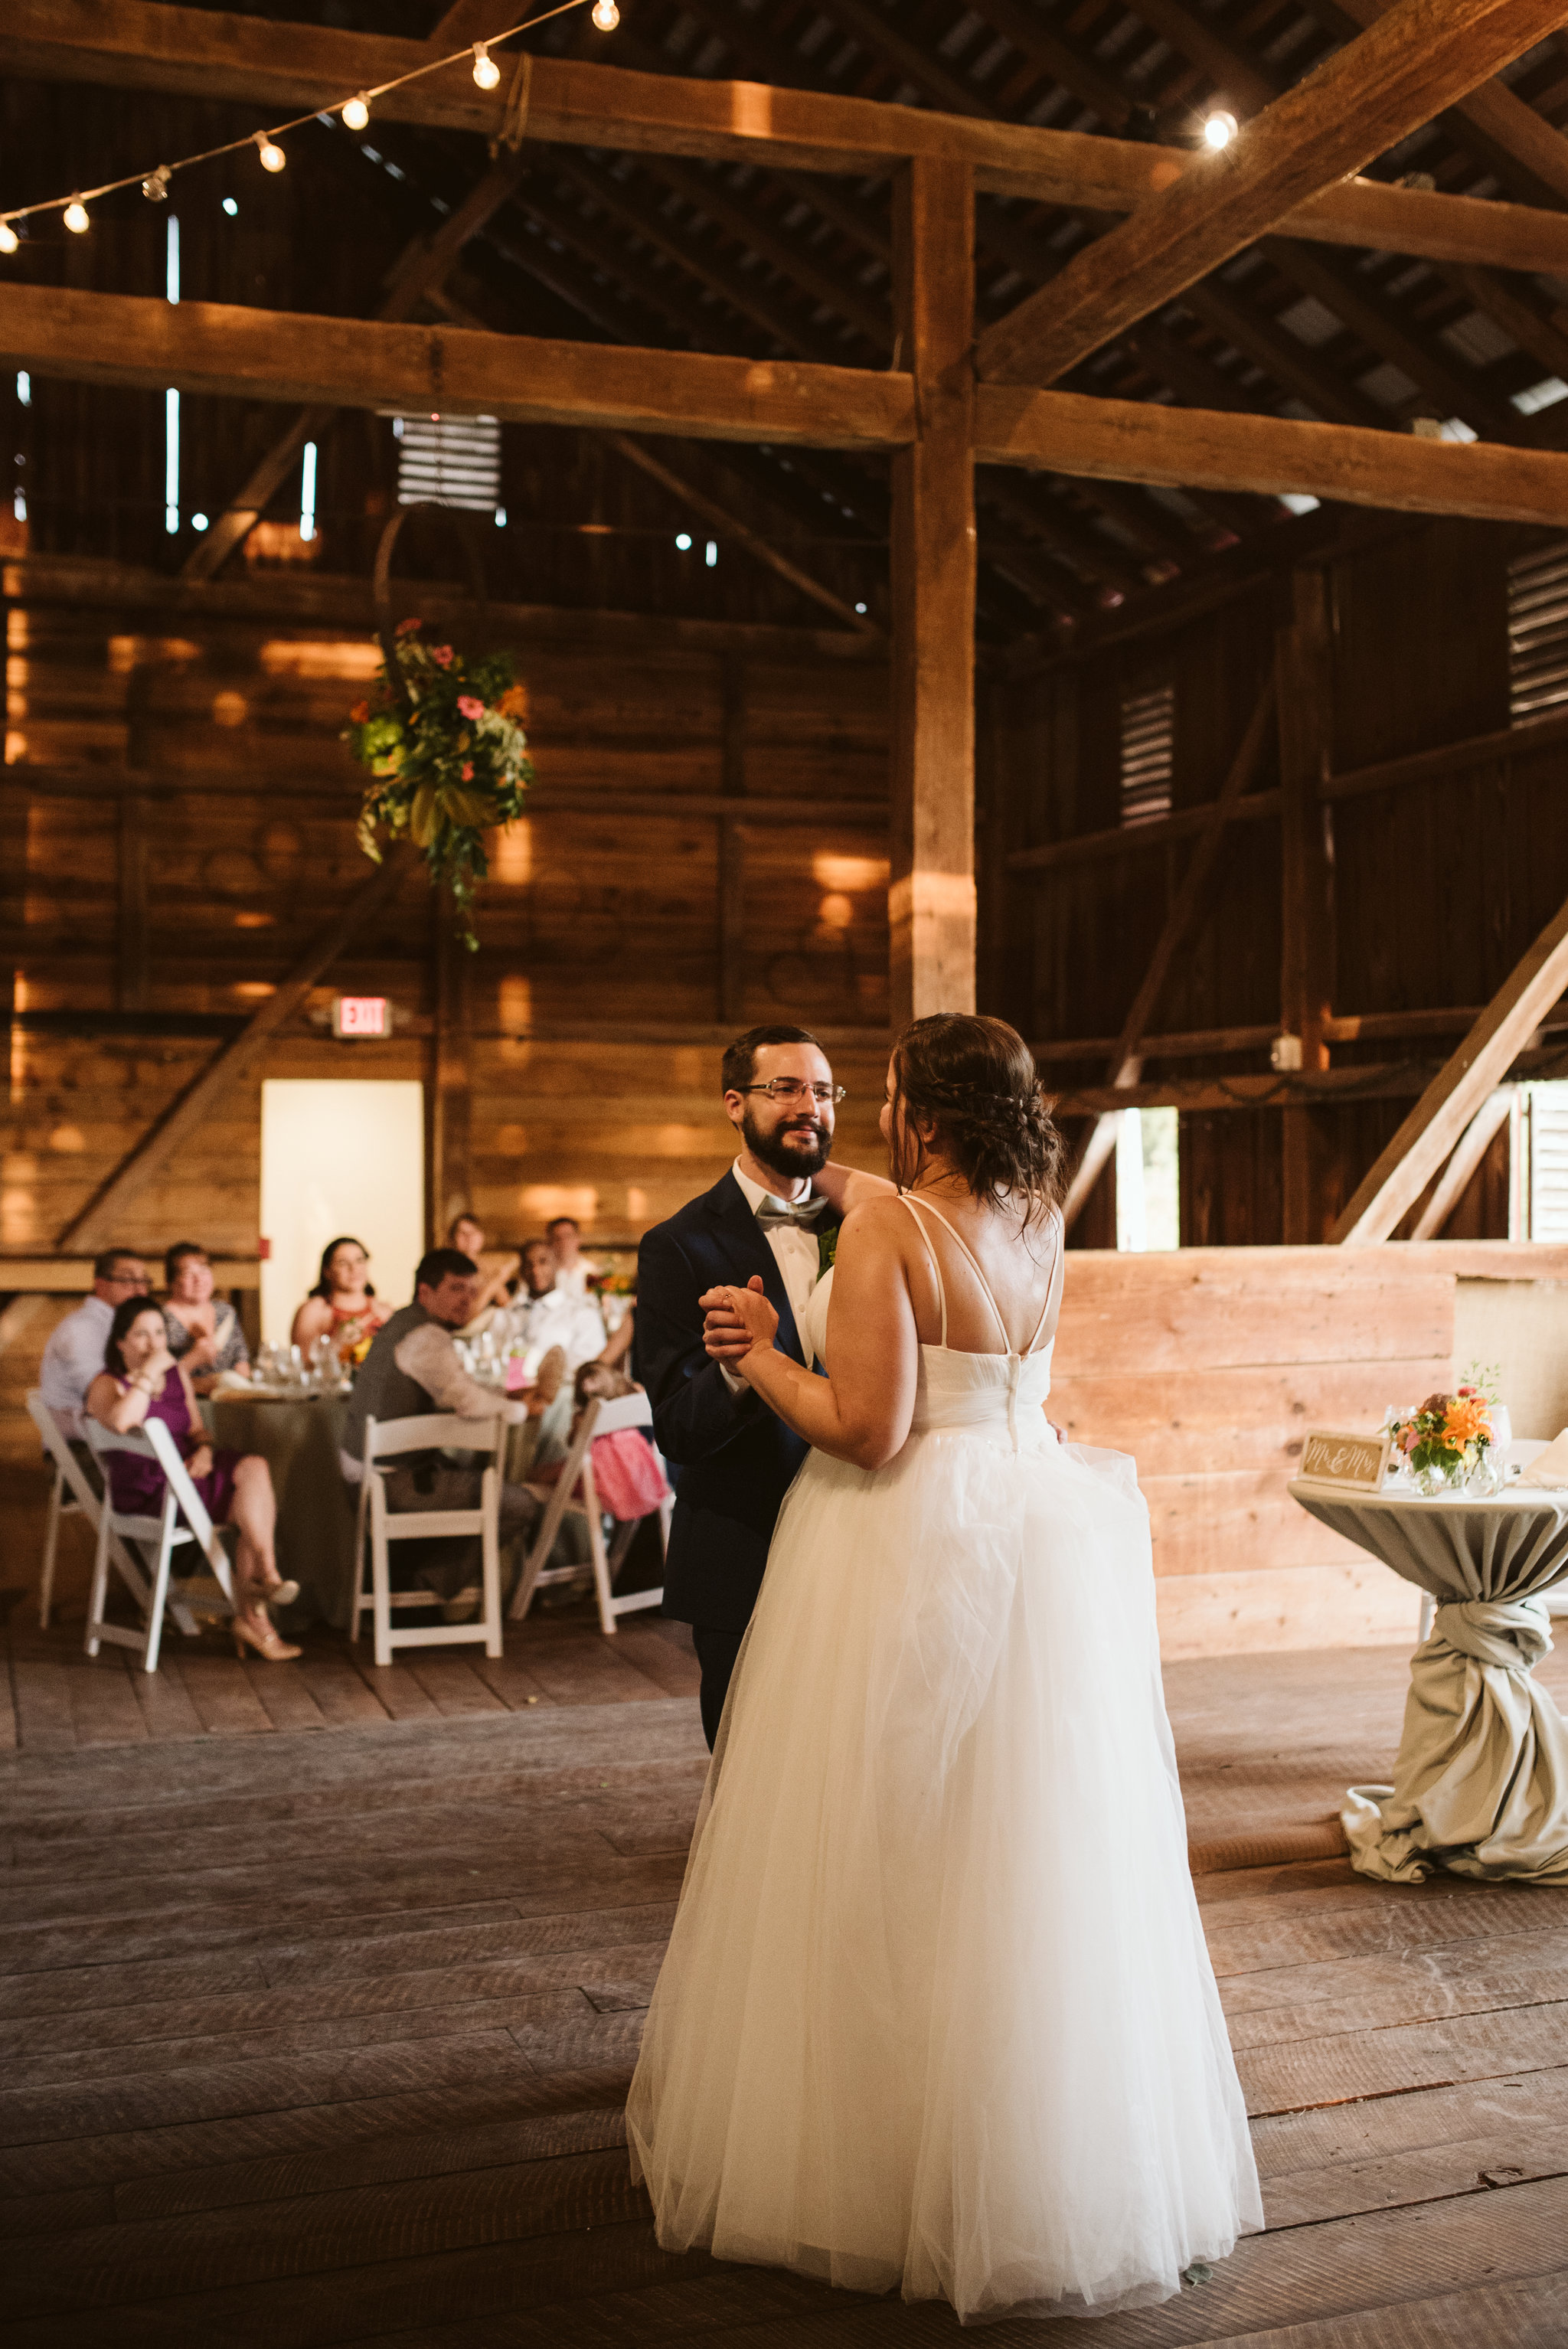 Rocklands Farm, Maryland, Intimate Wedding, Baltimore Wedding Photographer, Sungold Flower Co, Rustic, Romantic, Barn Wedding, Bride and Groom First Dance, Tulle Wedding Dress